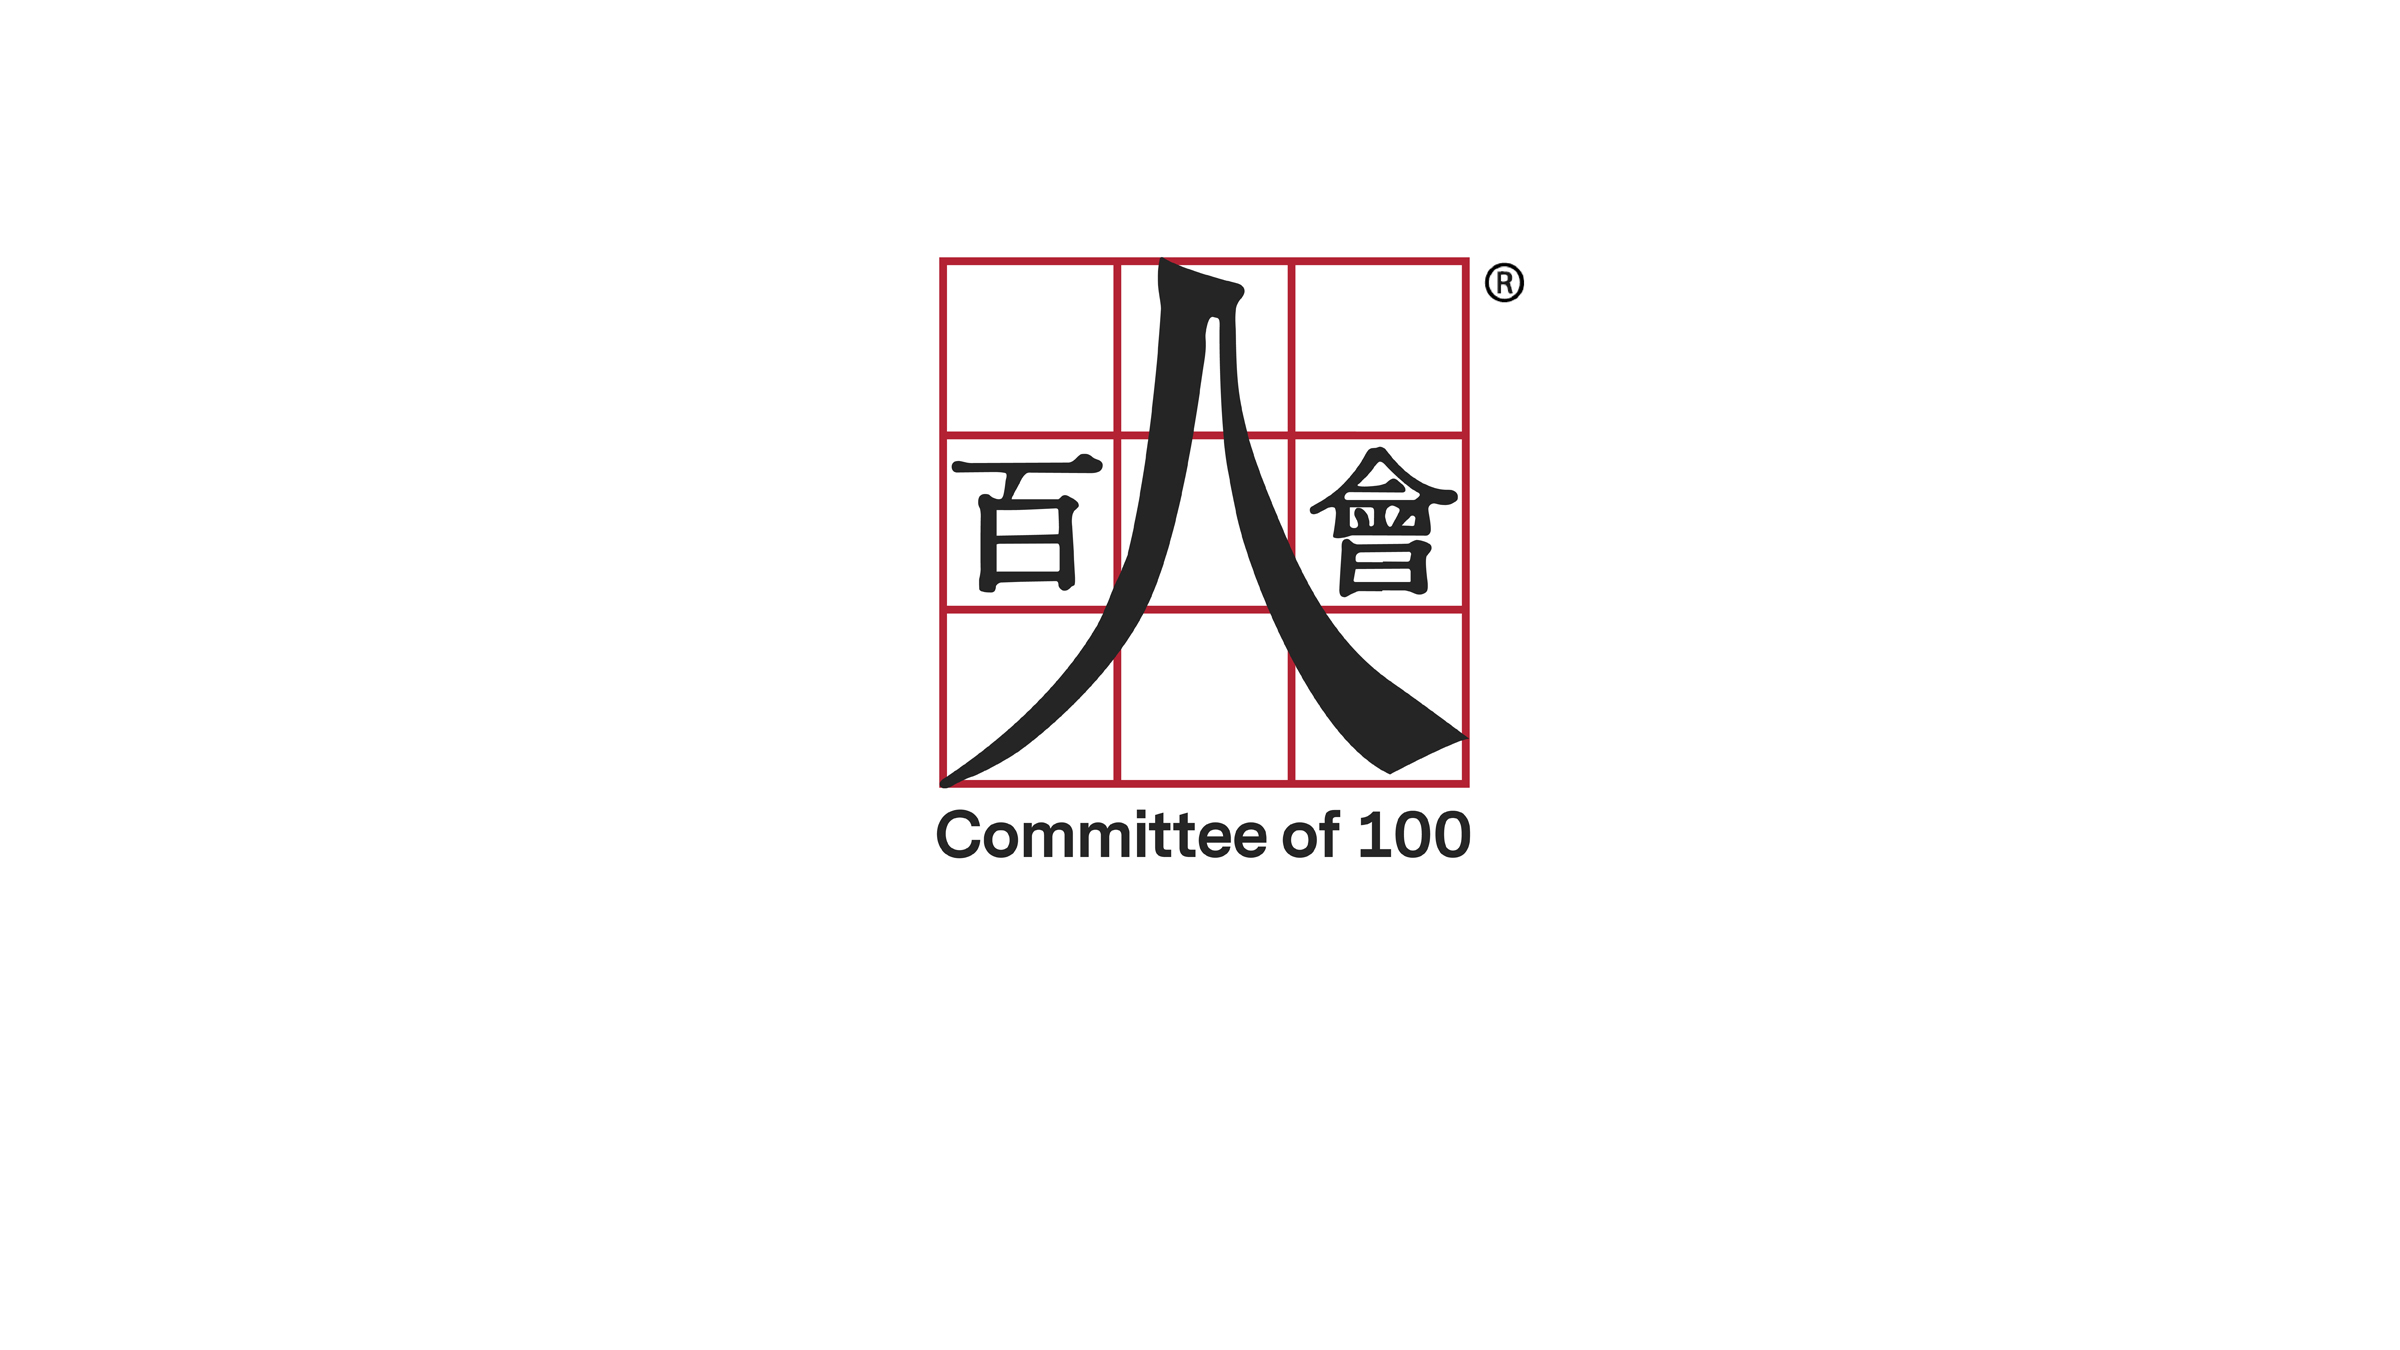 Zhengyu Huang to Step Down as President of Committee of 100